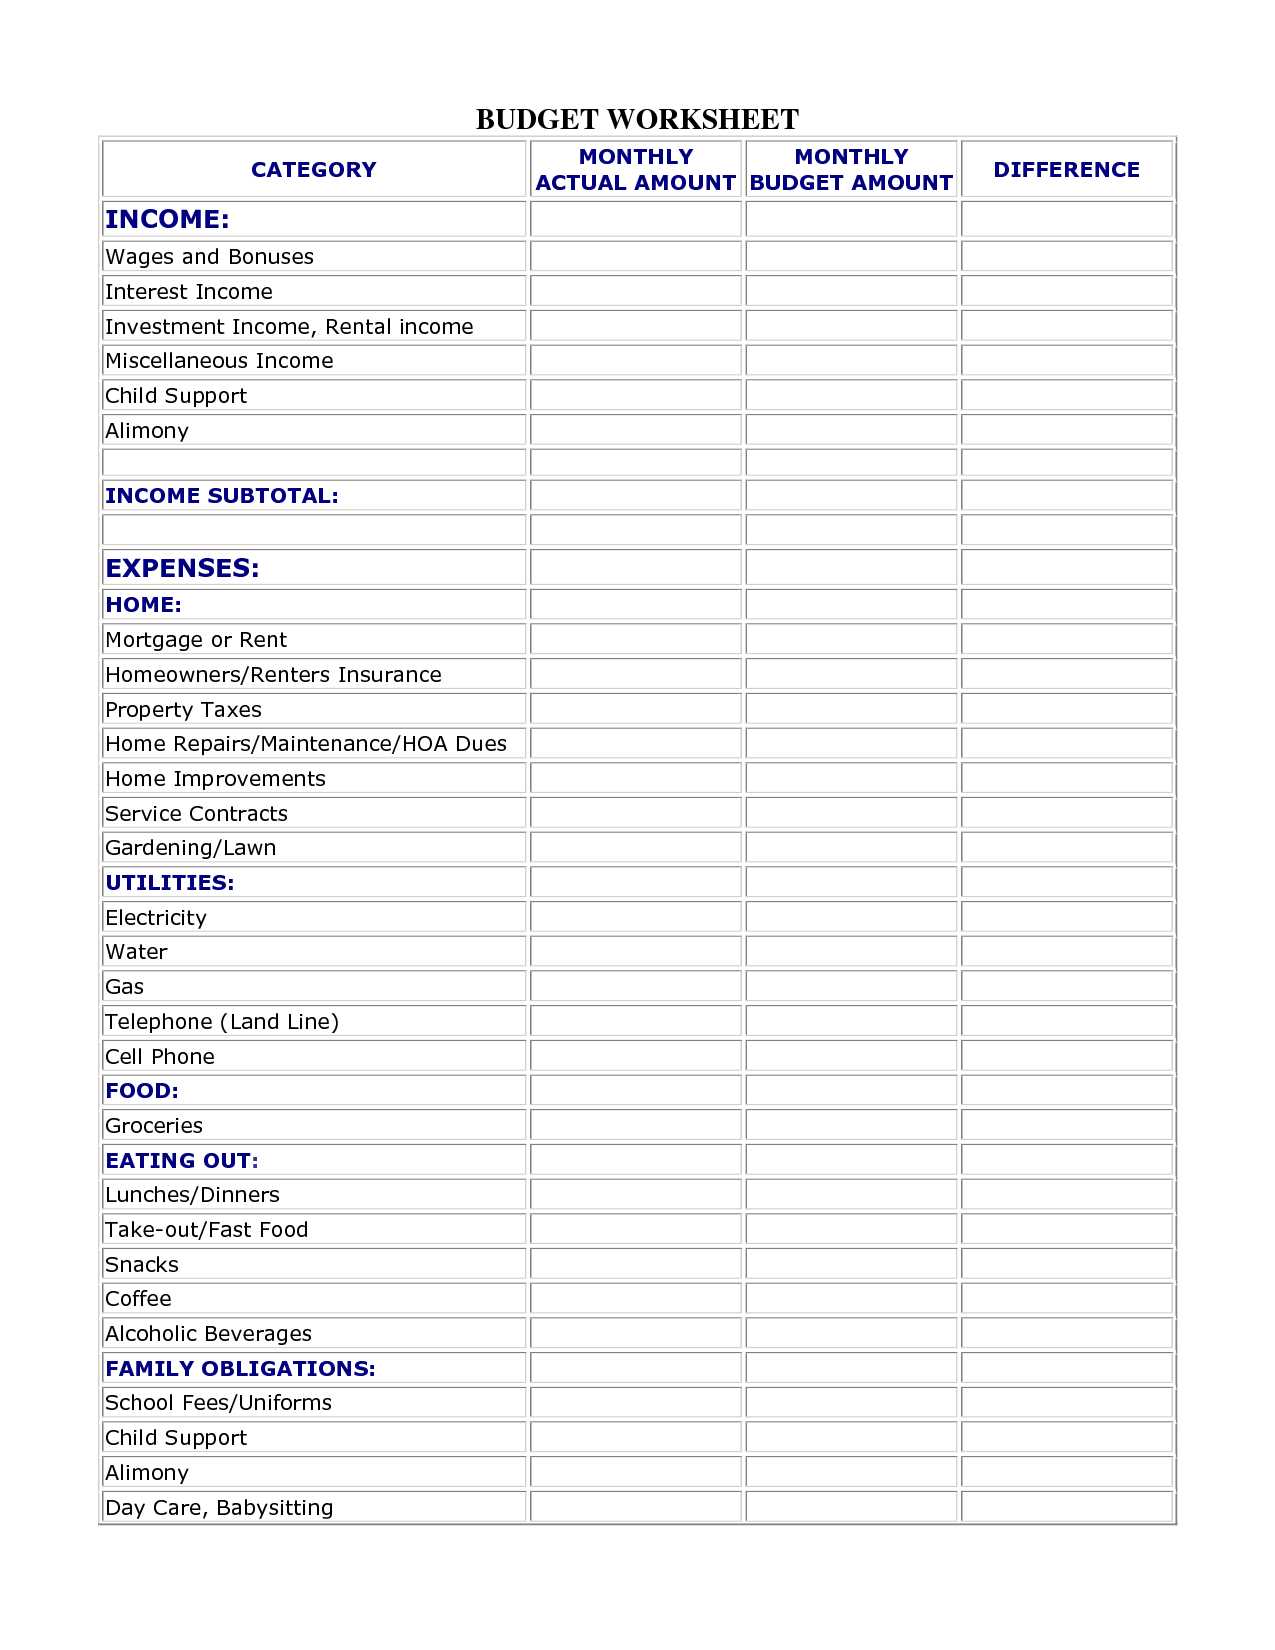 Florida Child Support Worksheet with Bud Spreadsheet Free Fresh Financial Bud Template Templates Excel